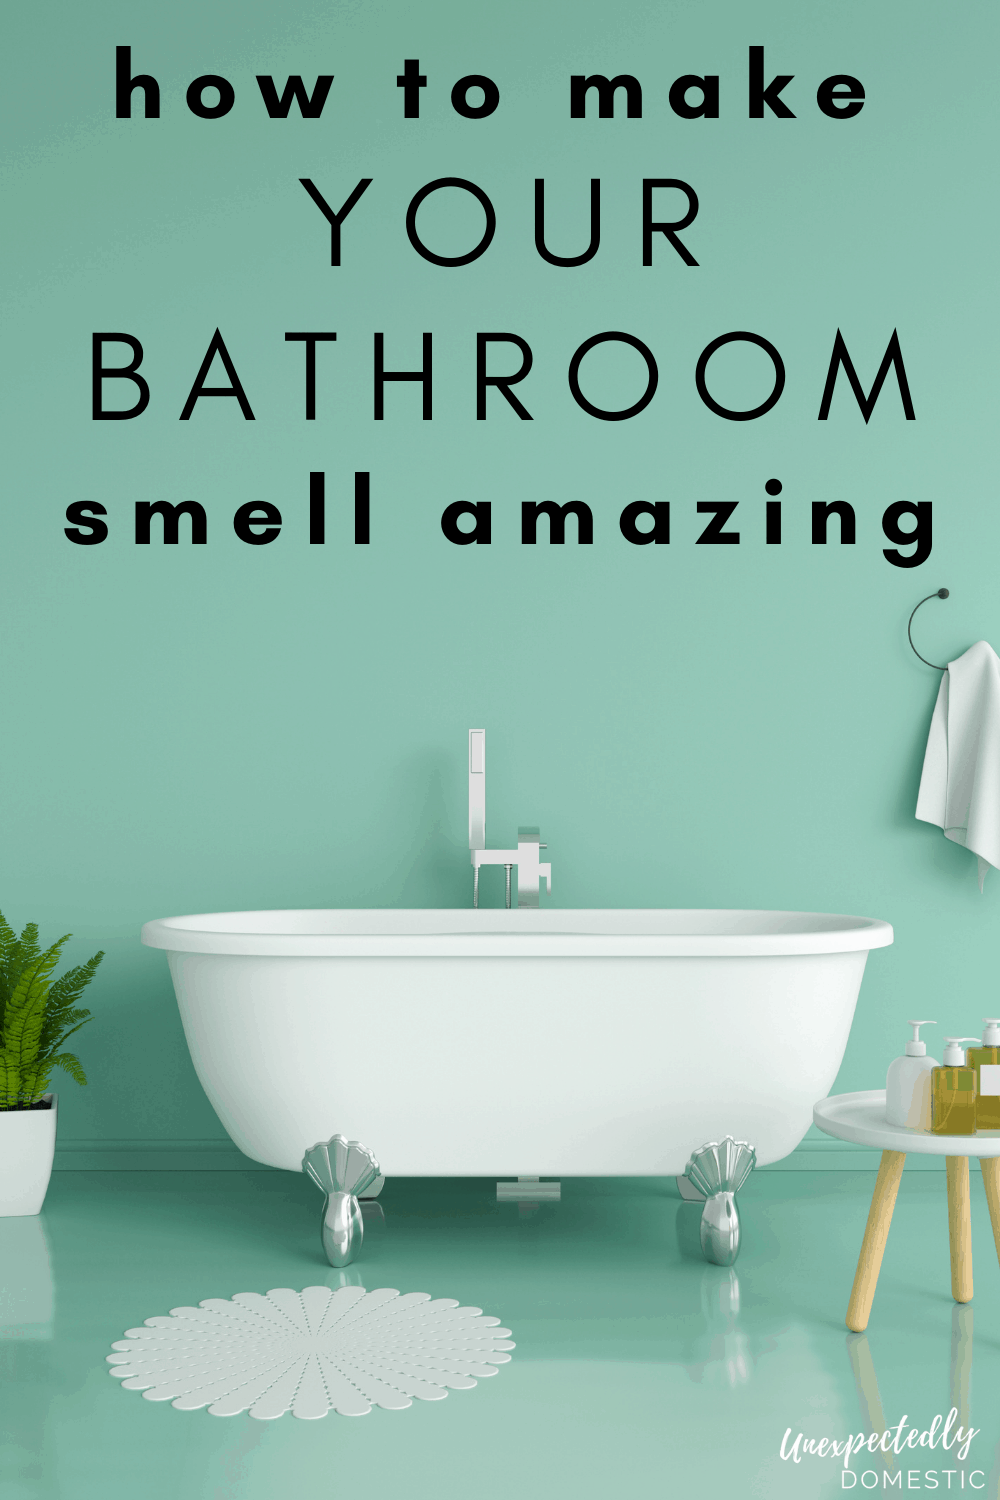 How to make your bathroom smell nice! Get rid of bathroom odor naturally with these easy hacks!